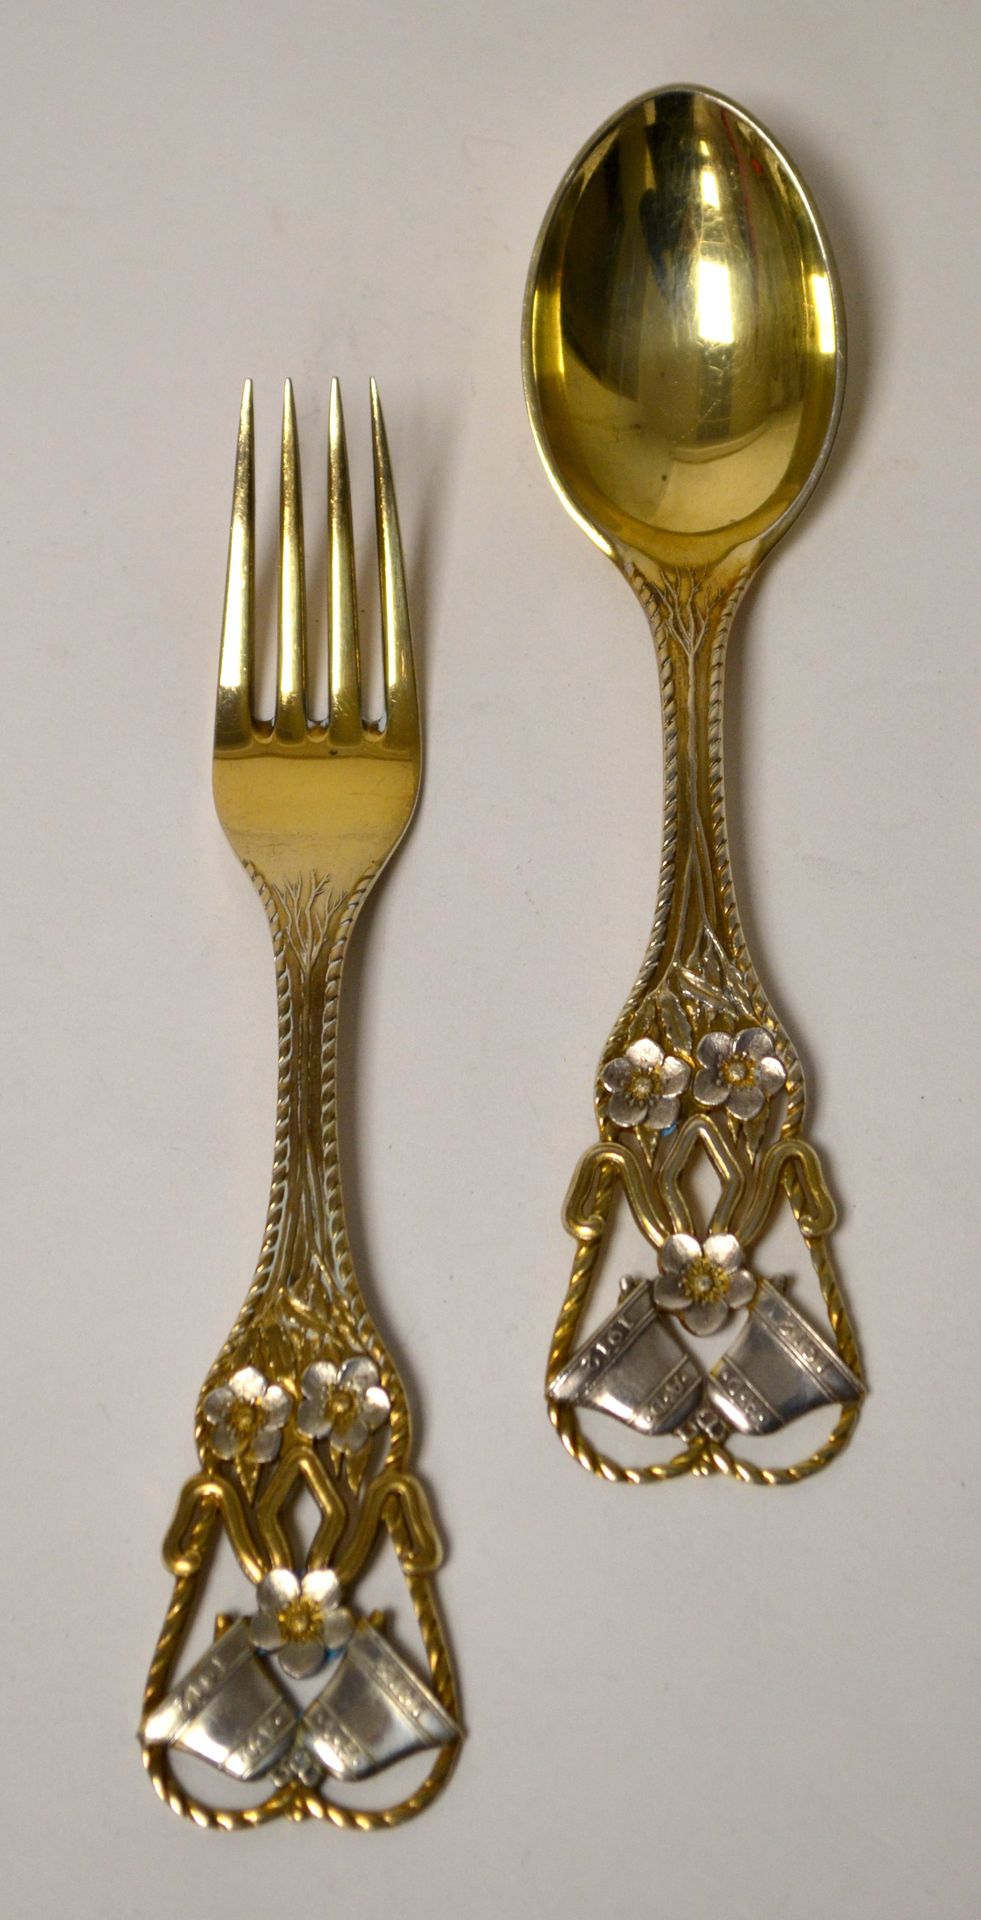 Null MICHELSEN, Denmark. A silver and gilt child's cutlery, decorated with flowe&hellip;